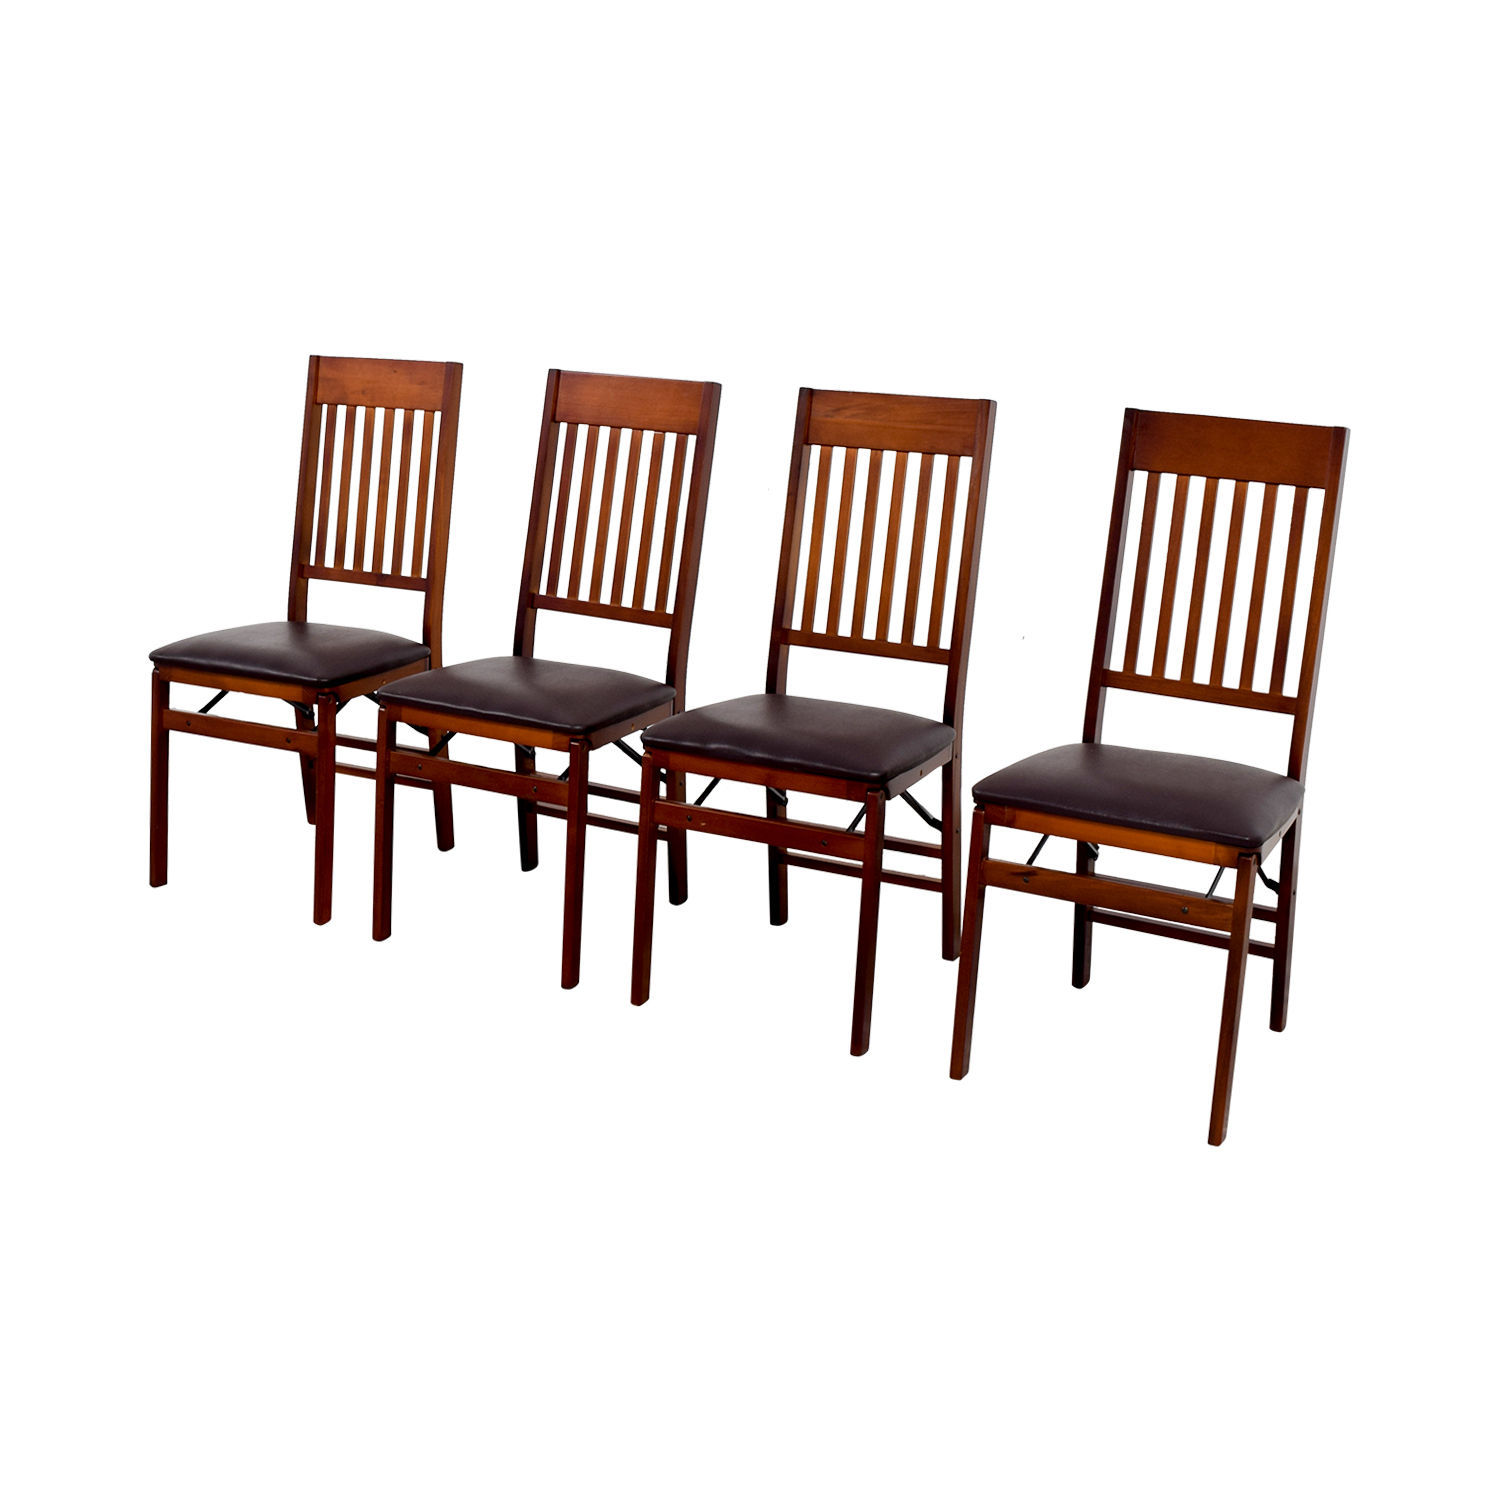 40 Off Bed Bath Beyond Bed Bath And Beyond Brown Folding Chairs Chairs within size 1500 X 1500